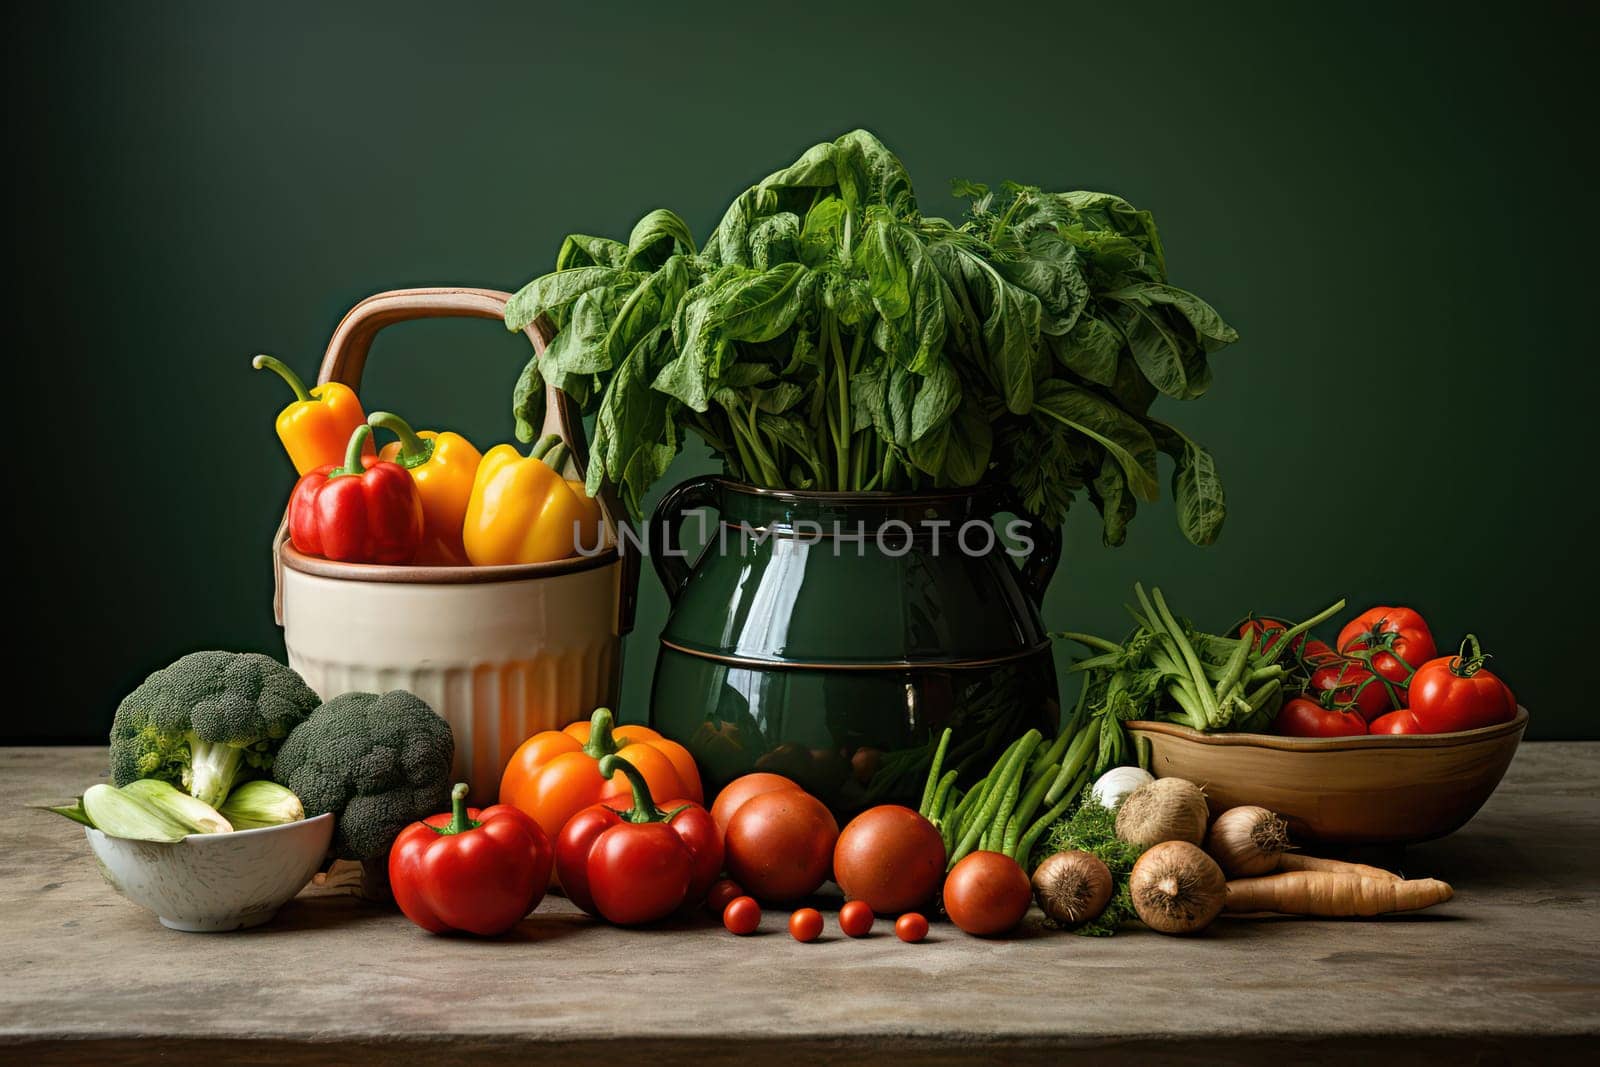 Fresh Organic Vegetable Feast on Rustic Wooden Table: A Colorful Harvest of Healthy Ingredients by Vichizh